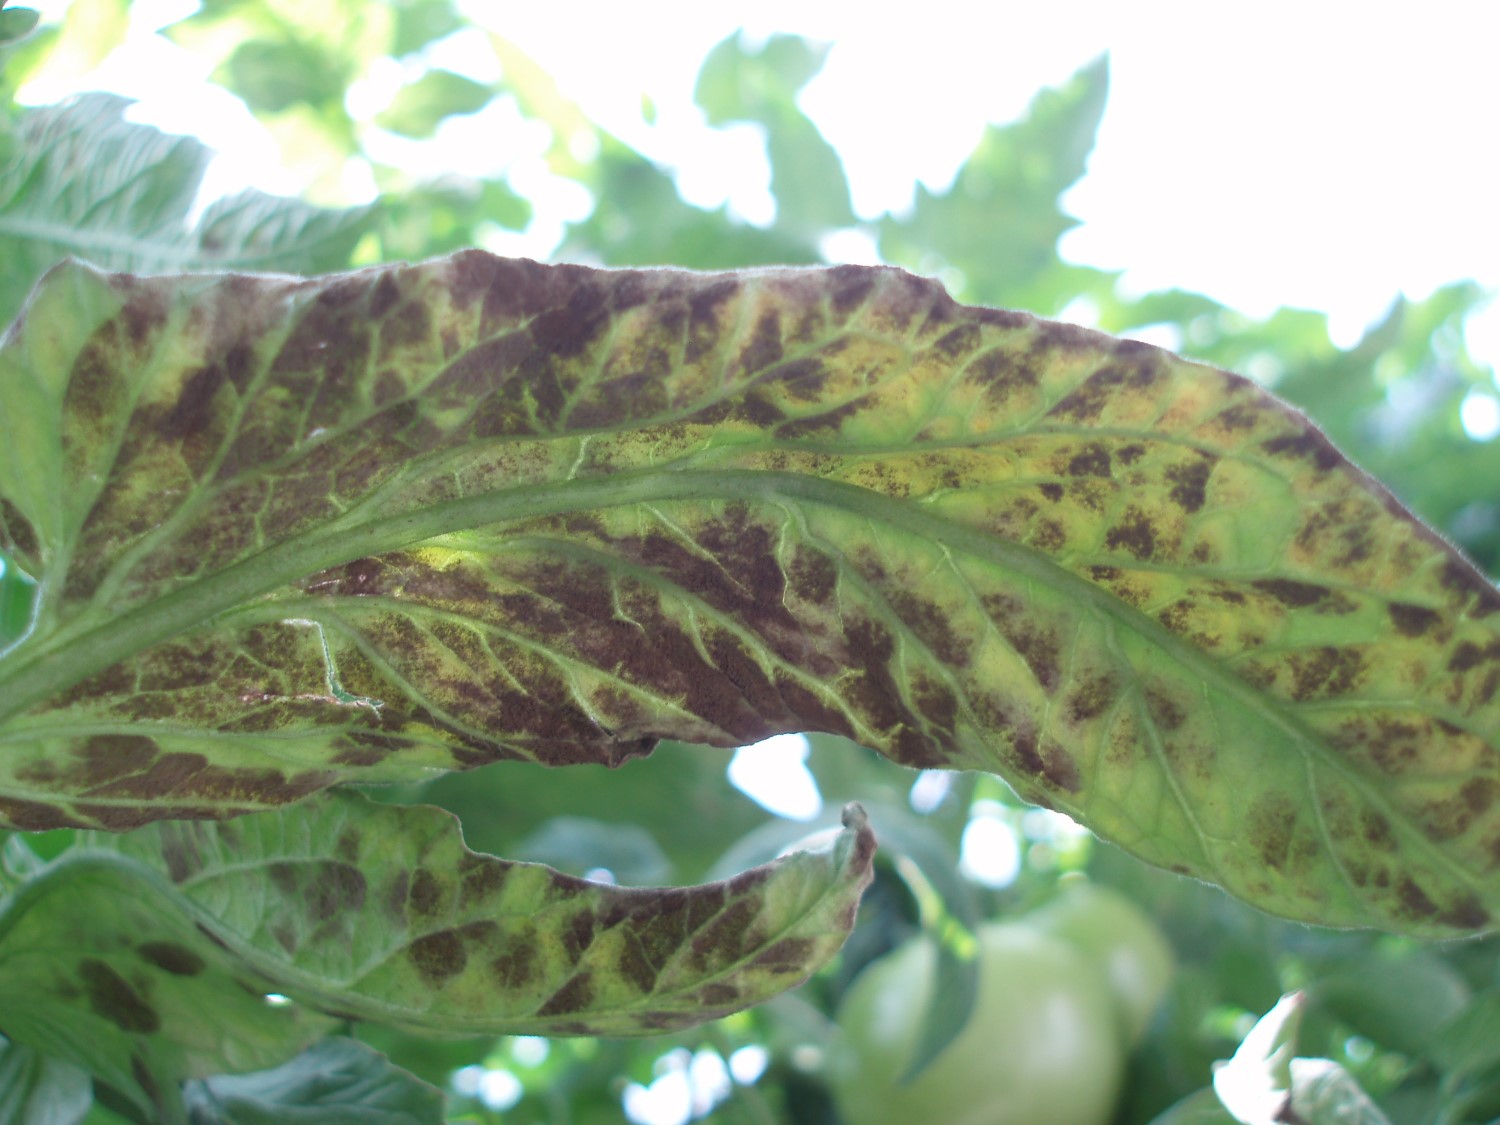 Severe tomato leaf mould infection with fungal lesions and leaf wilting. Copyright Dave Kaye, RSK ADAS.